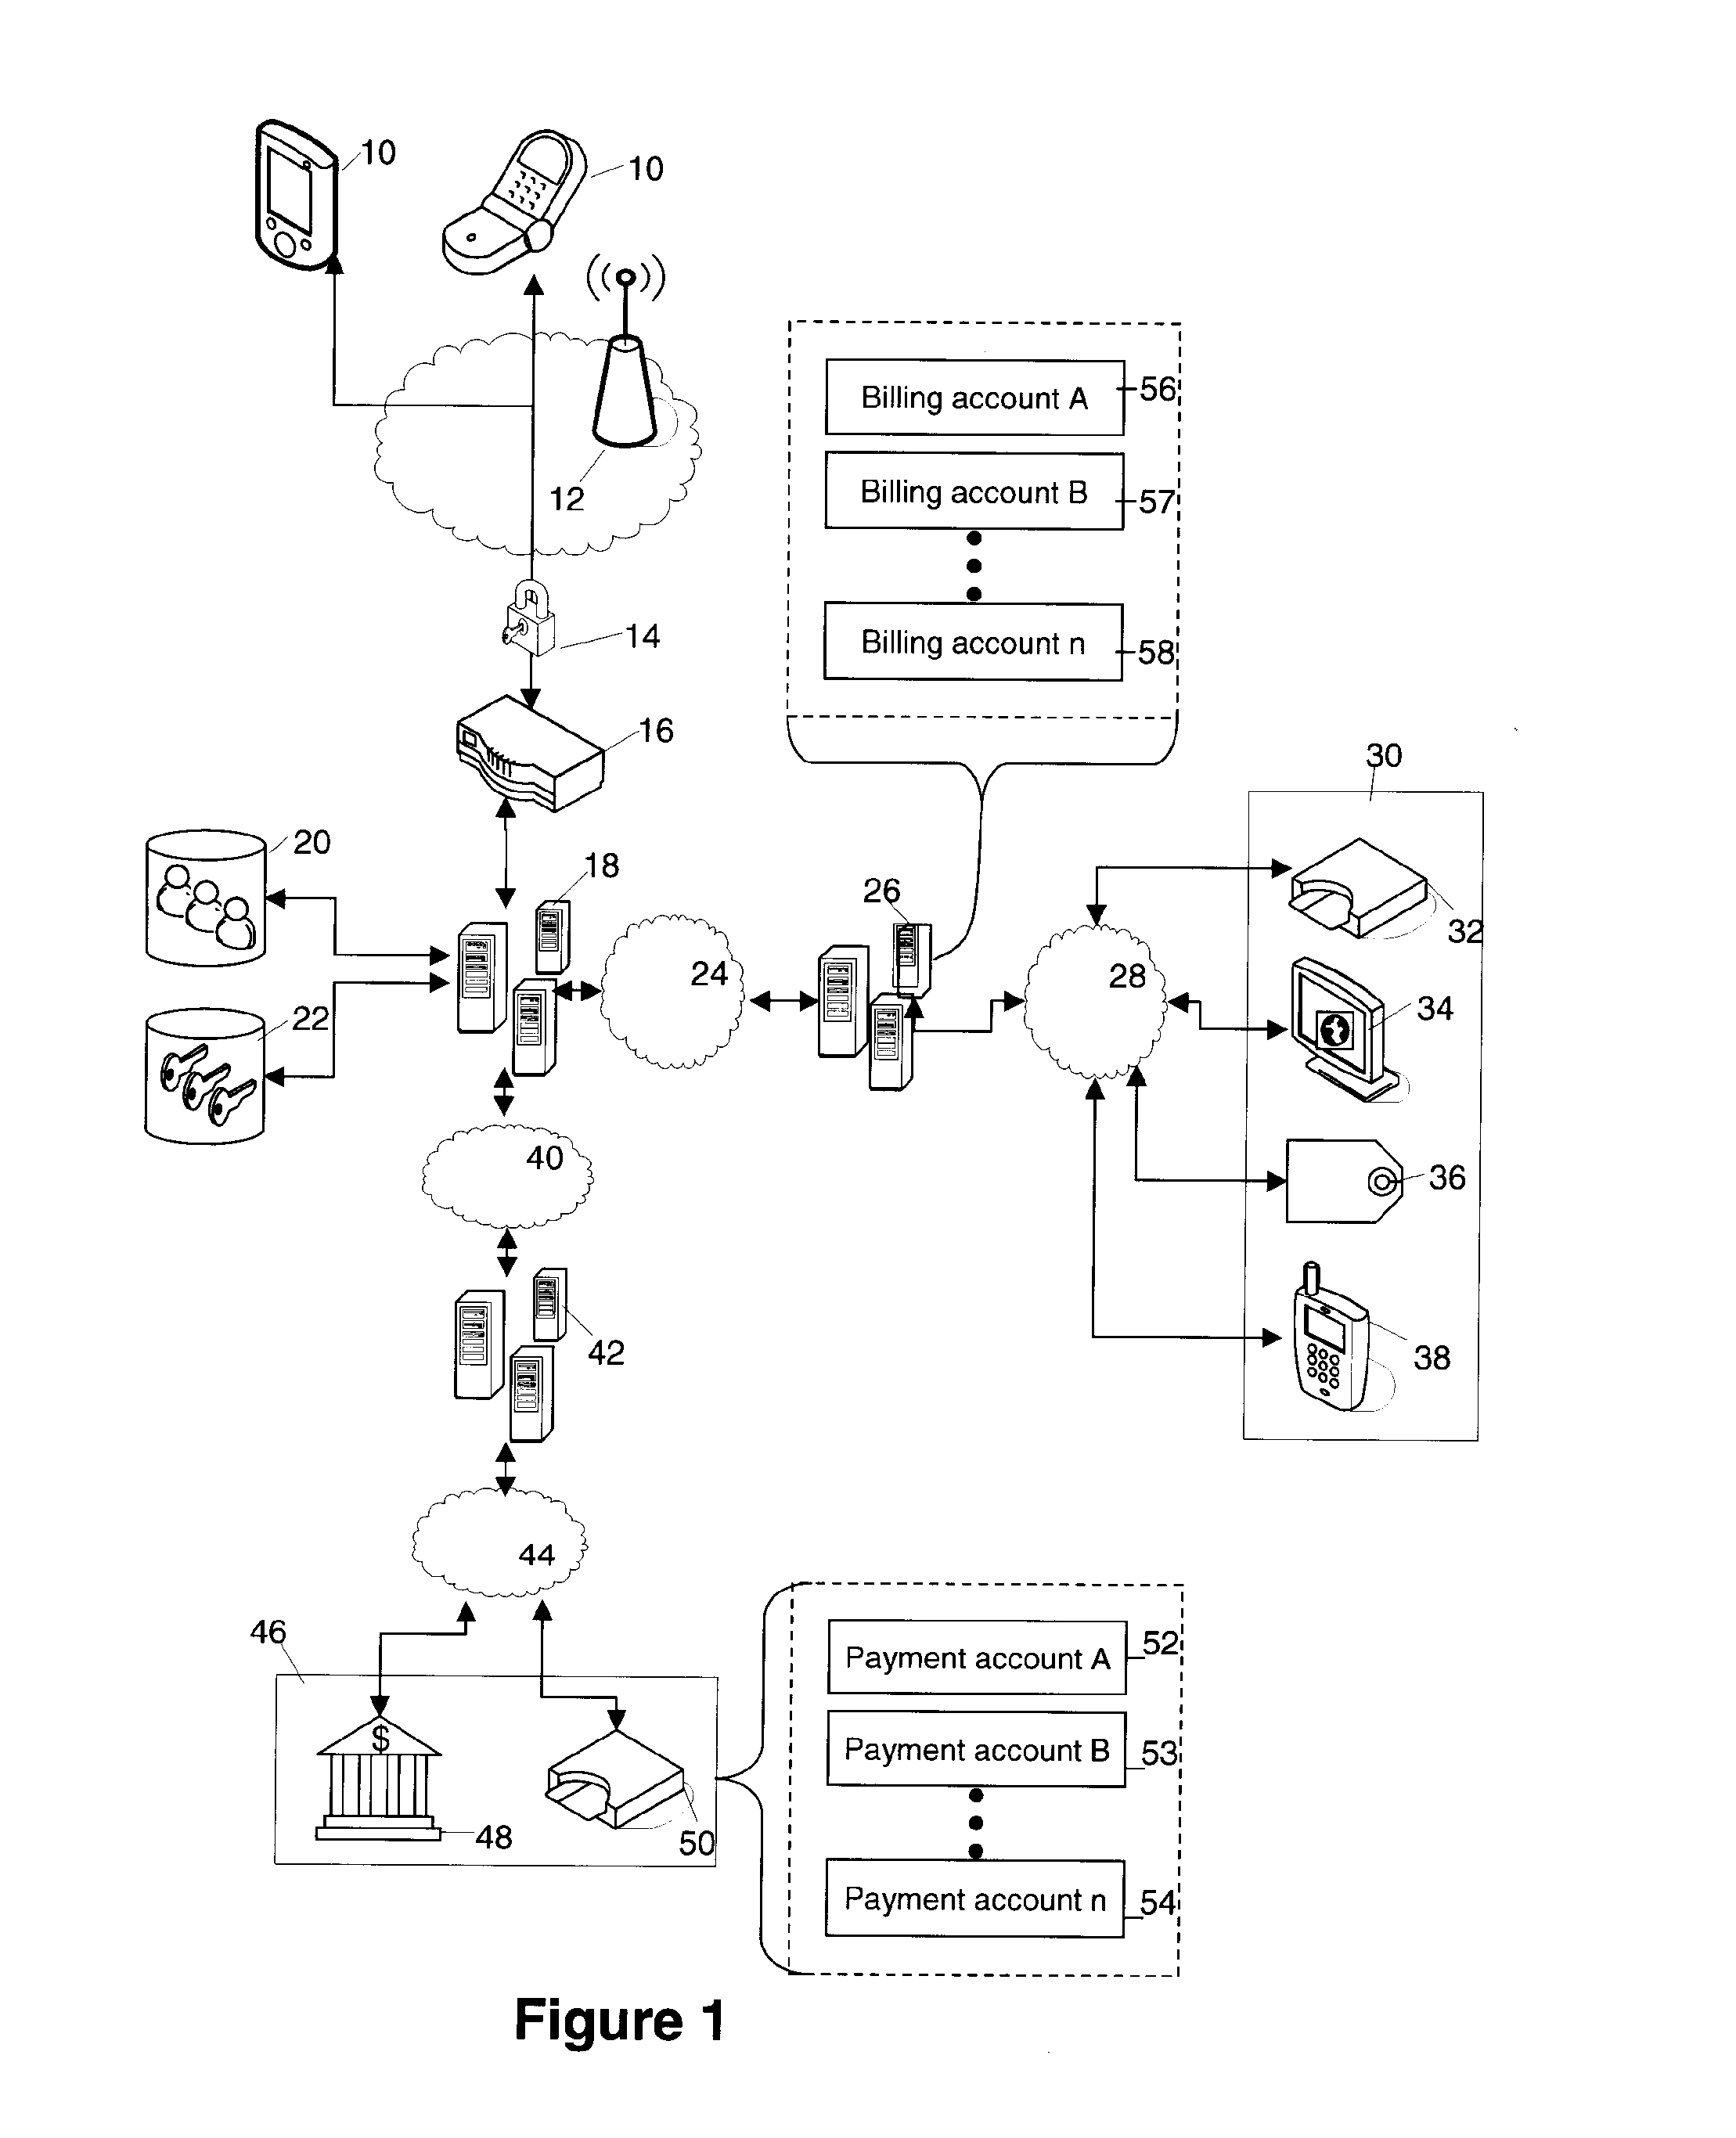 Secure billing system and method for a mobile device